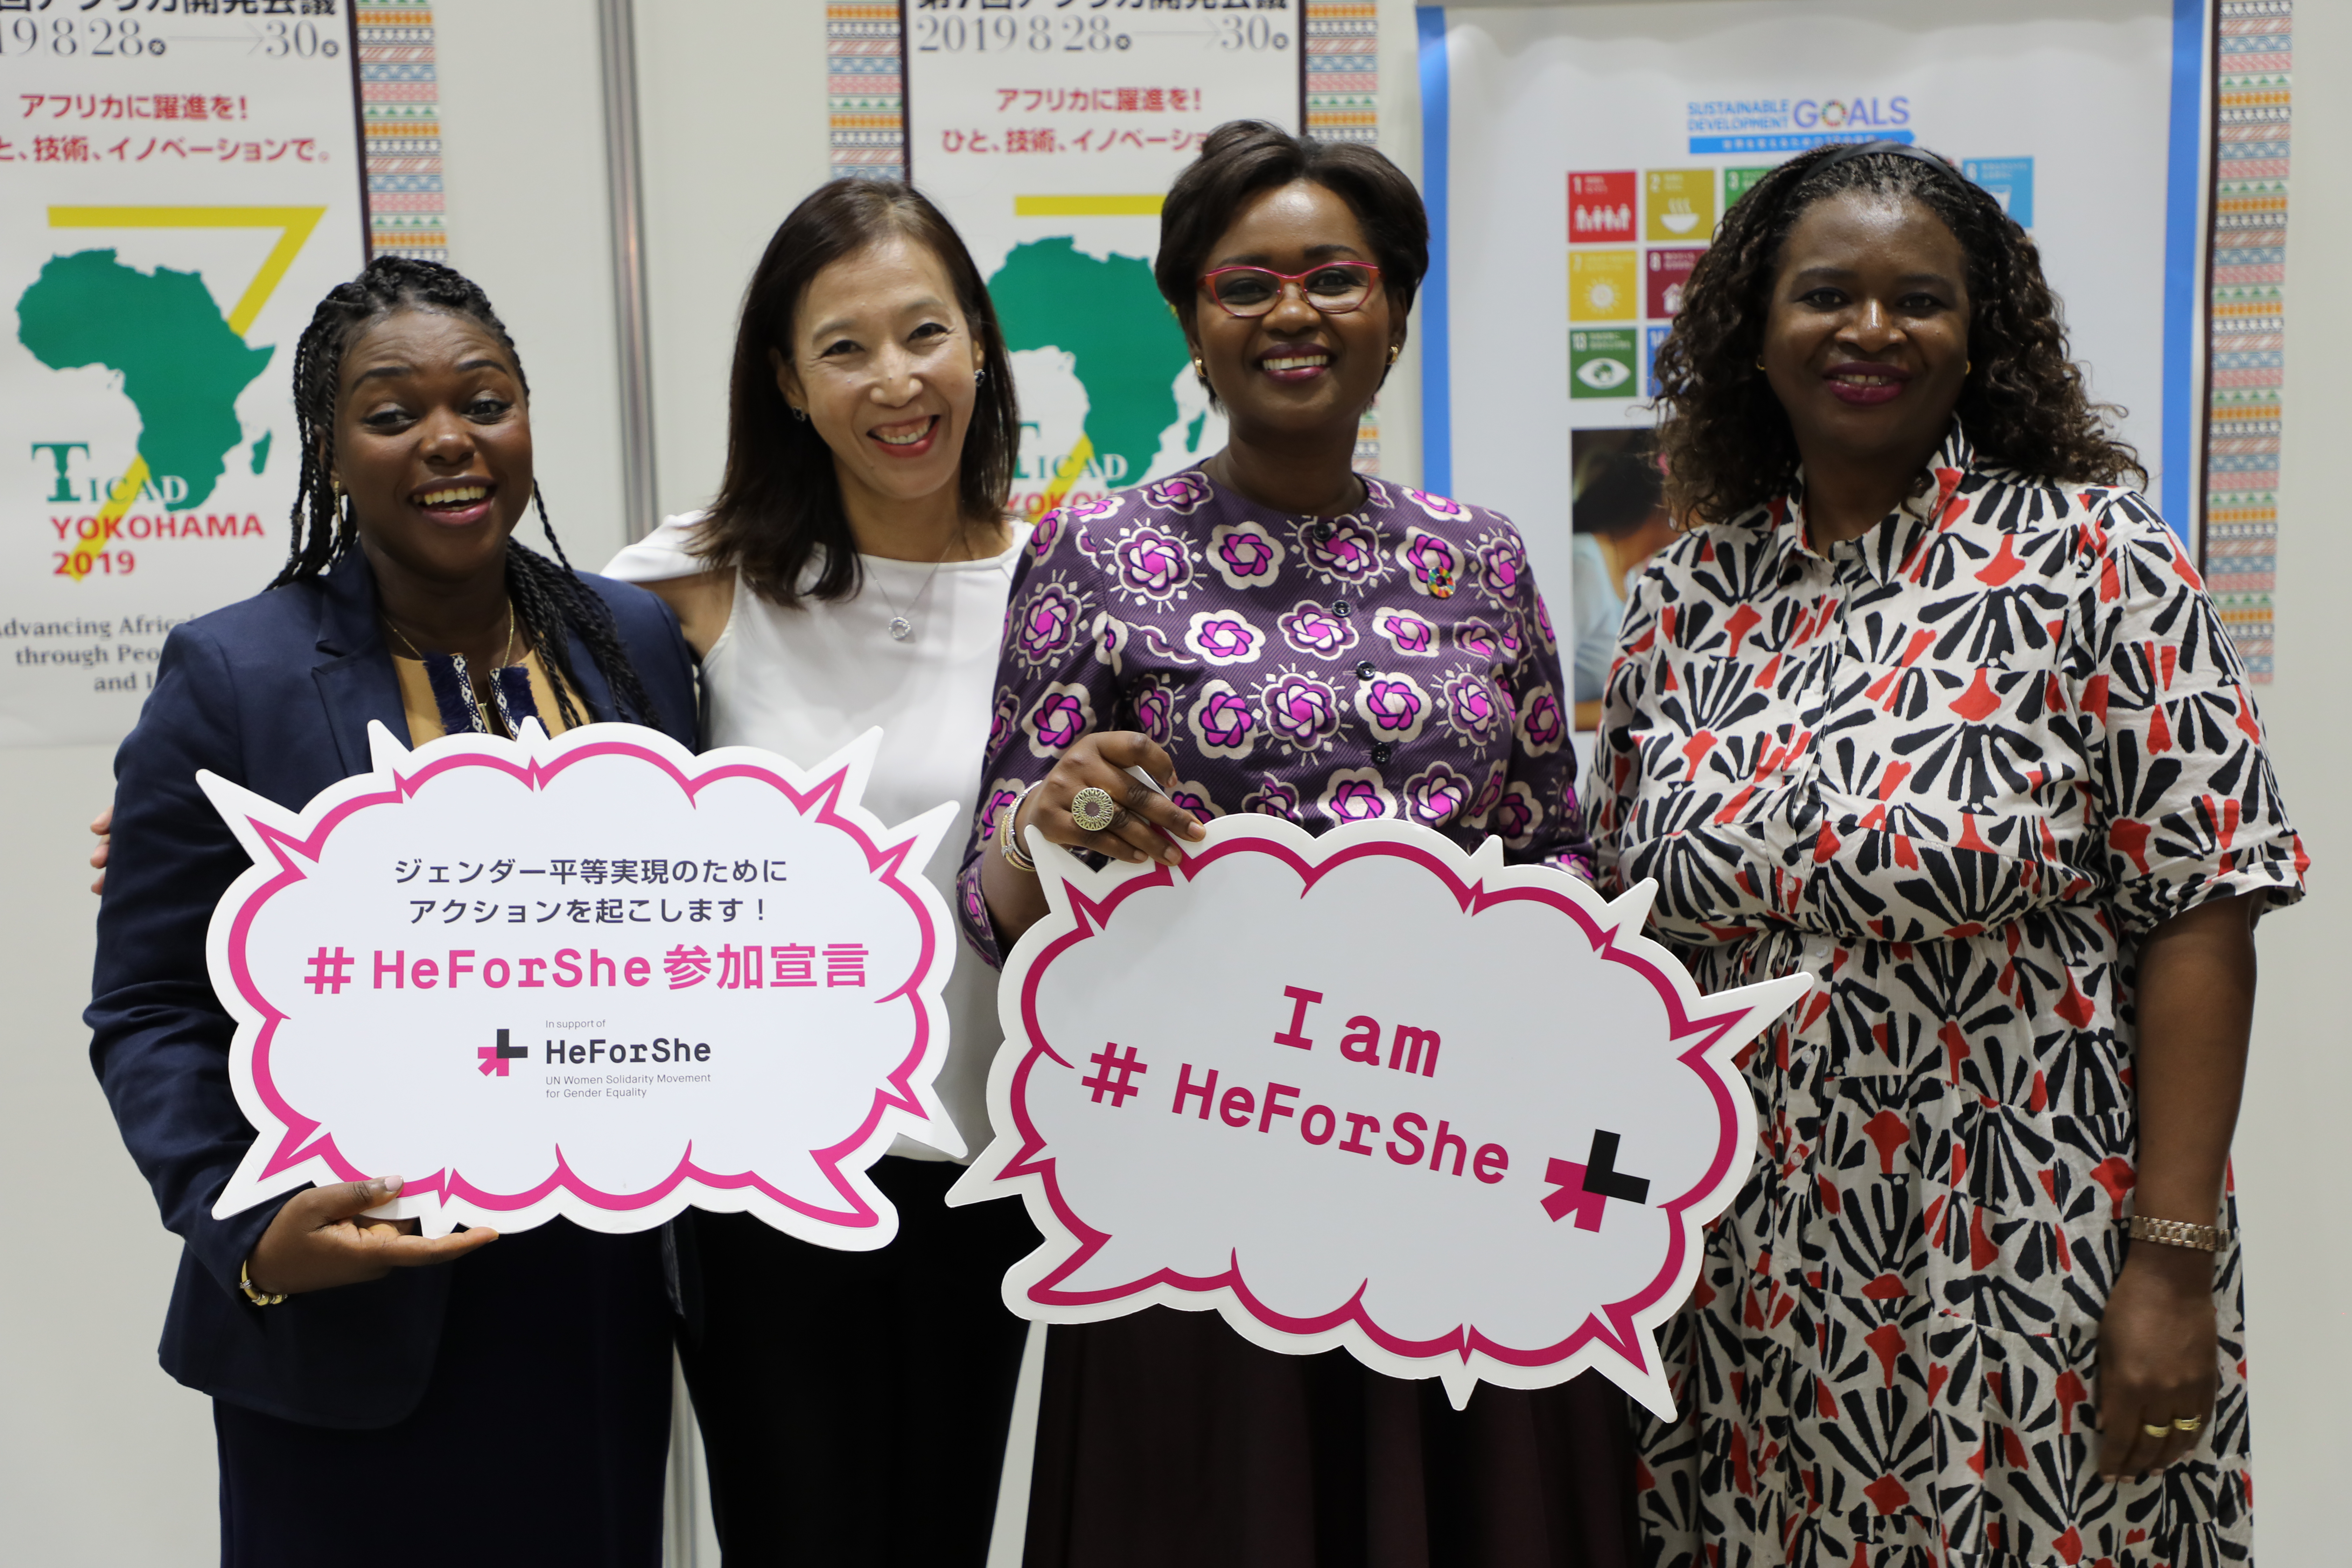 From right to left: Letty Chiwara, UN Women Representative to Ethiopia, Africa Union and UNECA; Oulimata Sarr, Regional Director a.i. UN Women WCARO; Kae Ishikawa, Director of UN Women Japan Liaison Office; Mame Khary Diene, Founder of Bioessence.